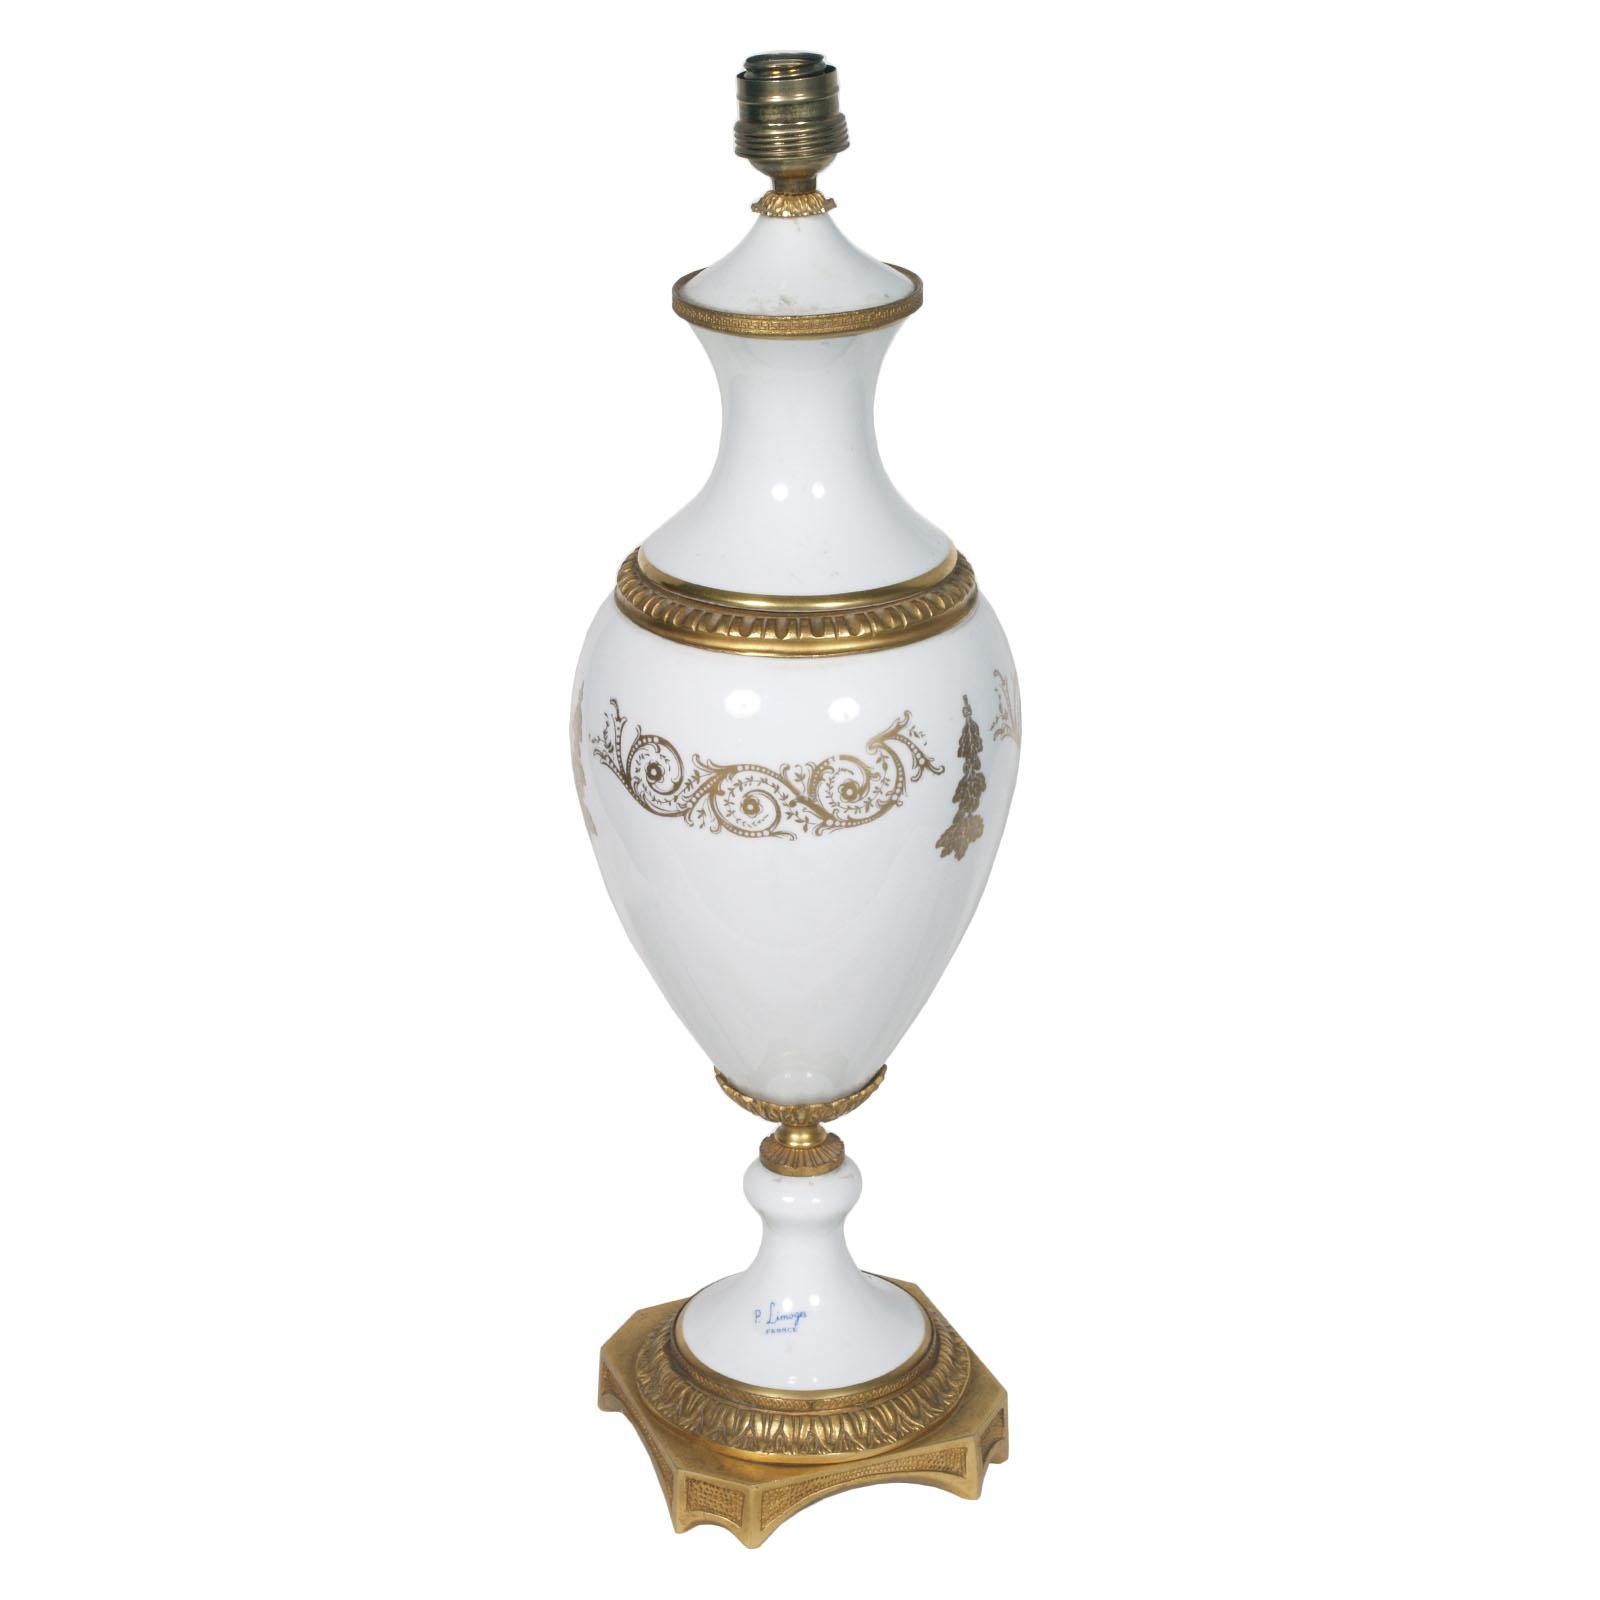 1930s French table lamp with Limoges white bisque porcelain decorated gold; rings and base in gilded bronze
Overhauled electrical system
Measures Limoges cm: H 55 diameter 20. Total height cm 85 diameter 40.


LIMOGES PORCELAIN
Limoges porcelain is